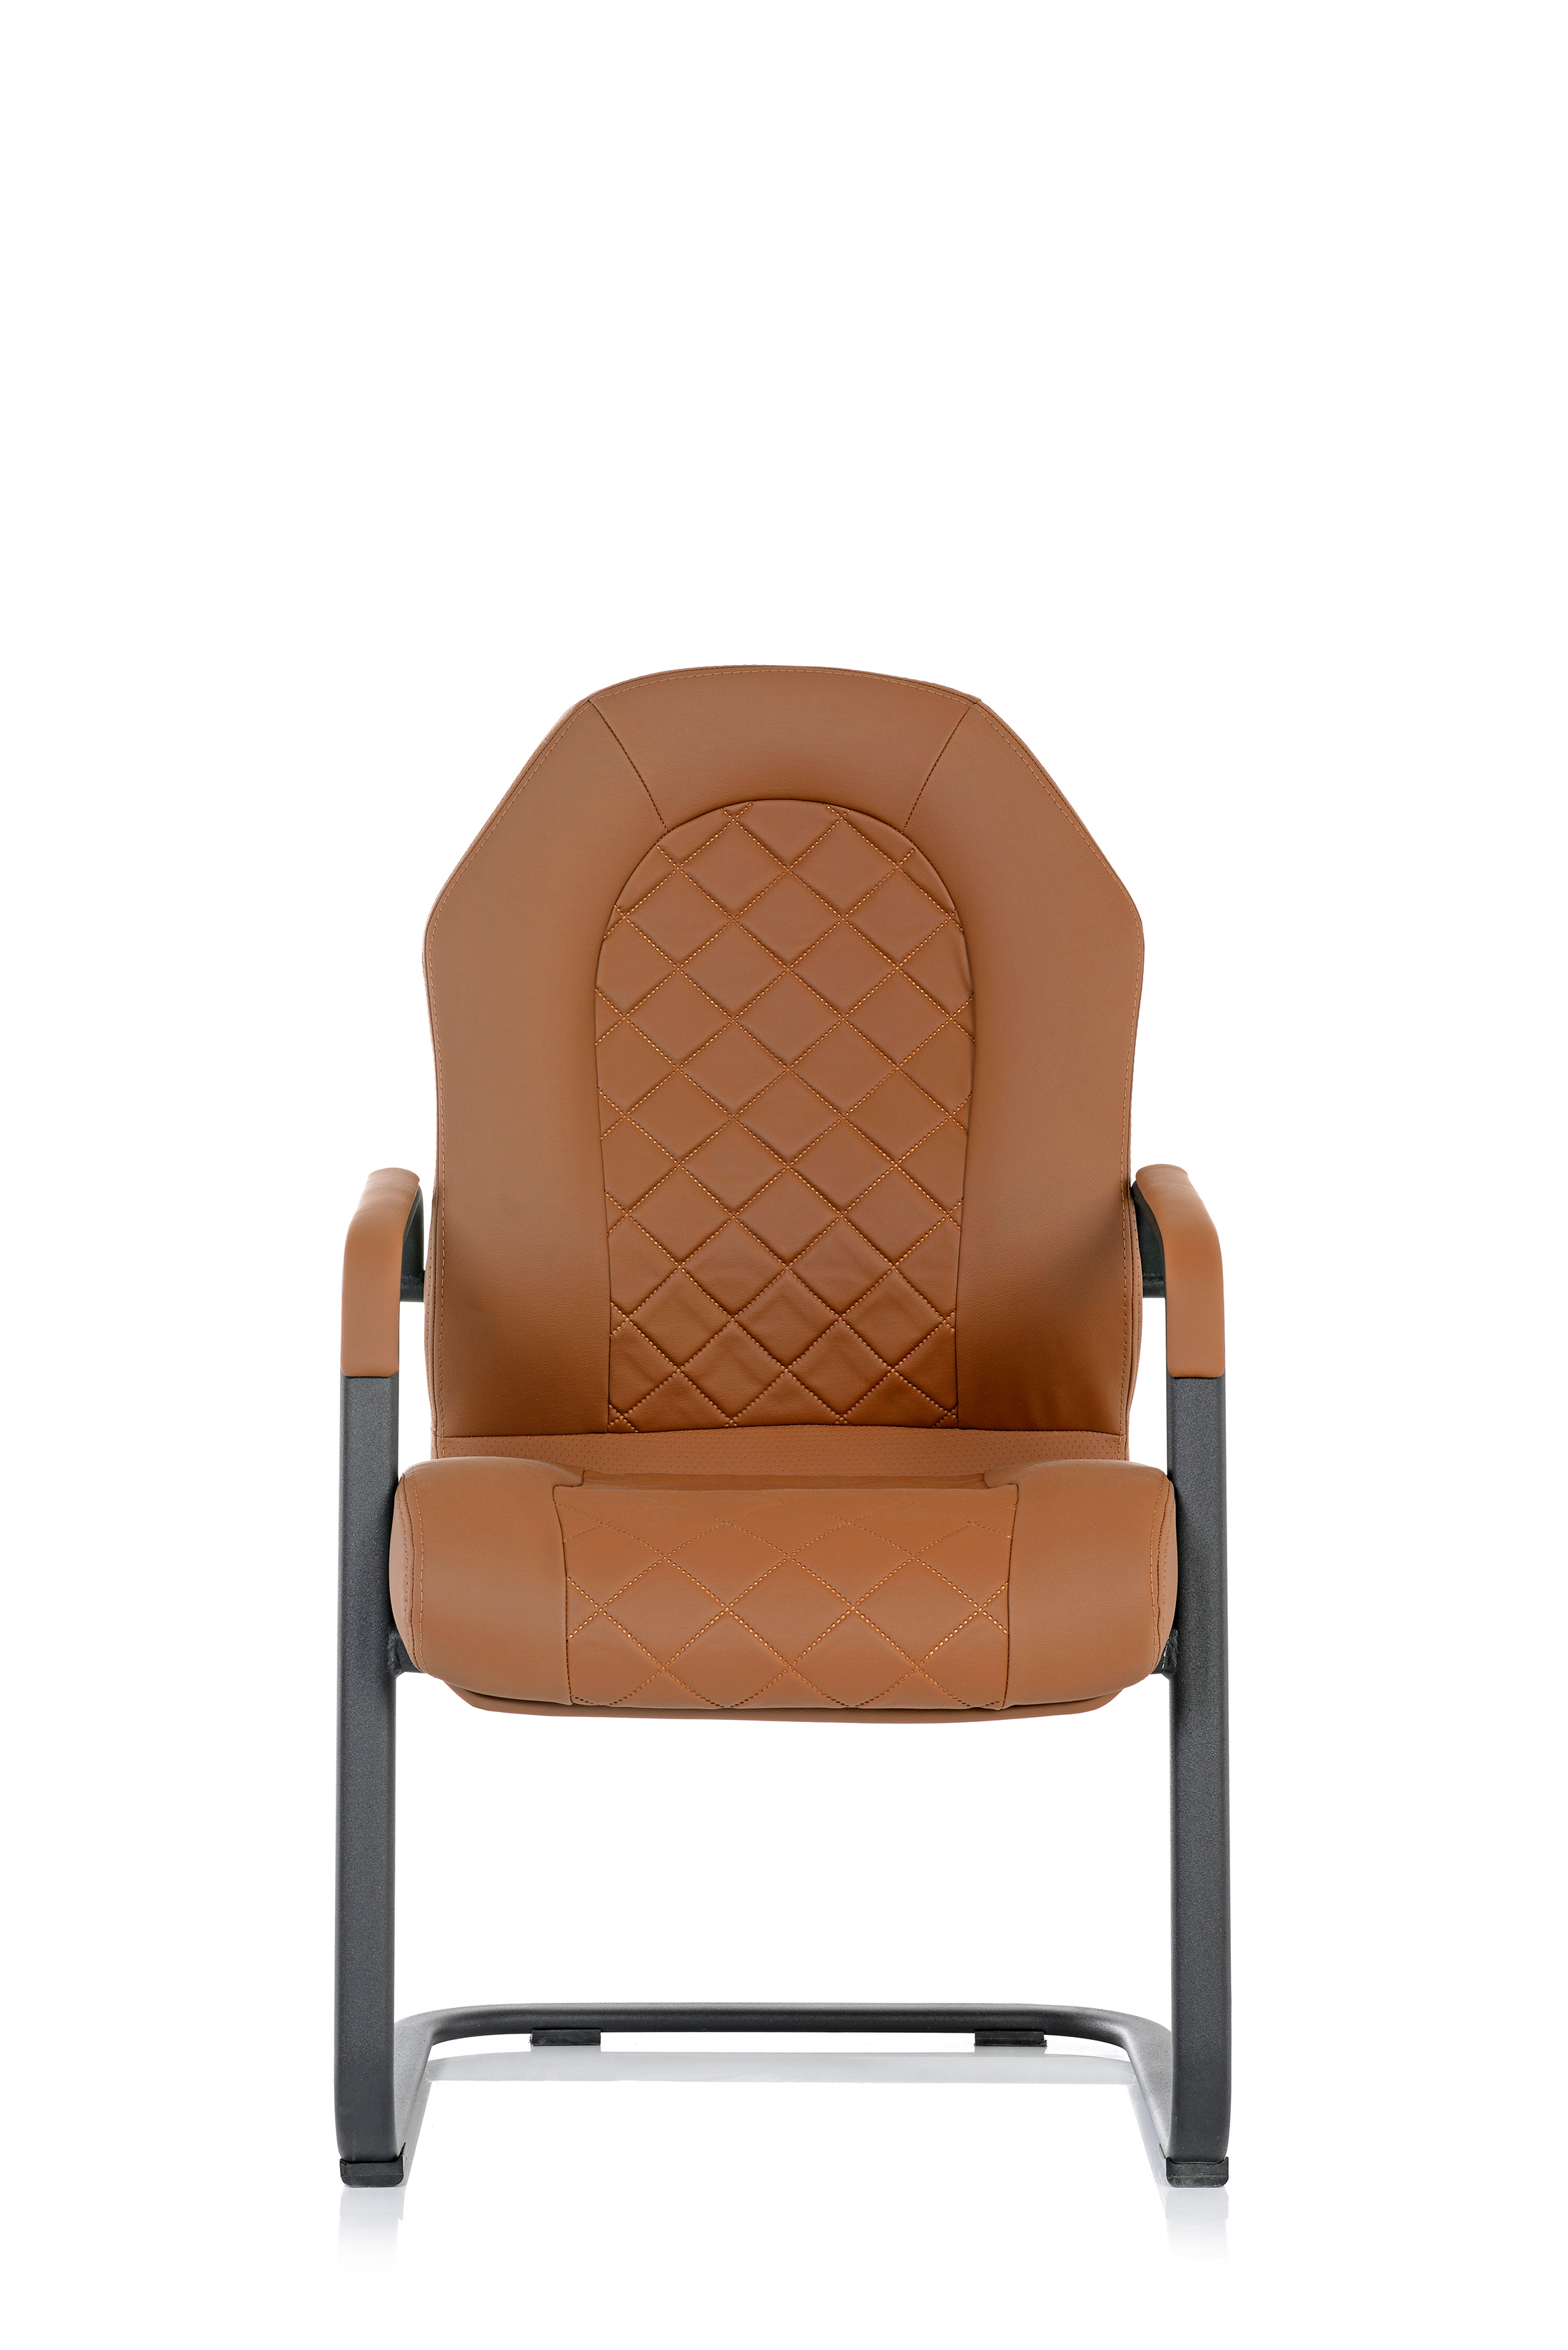 FORTE 300P VISITOR CHAIR